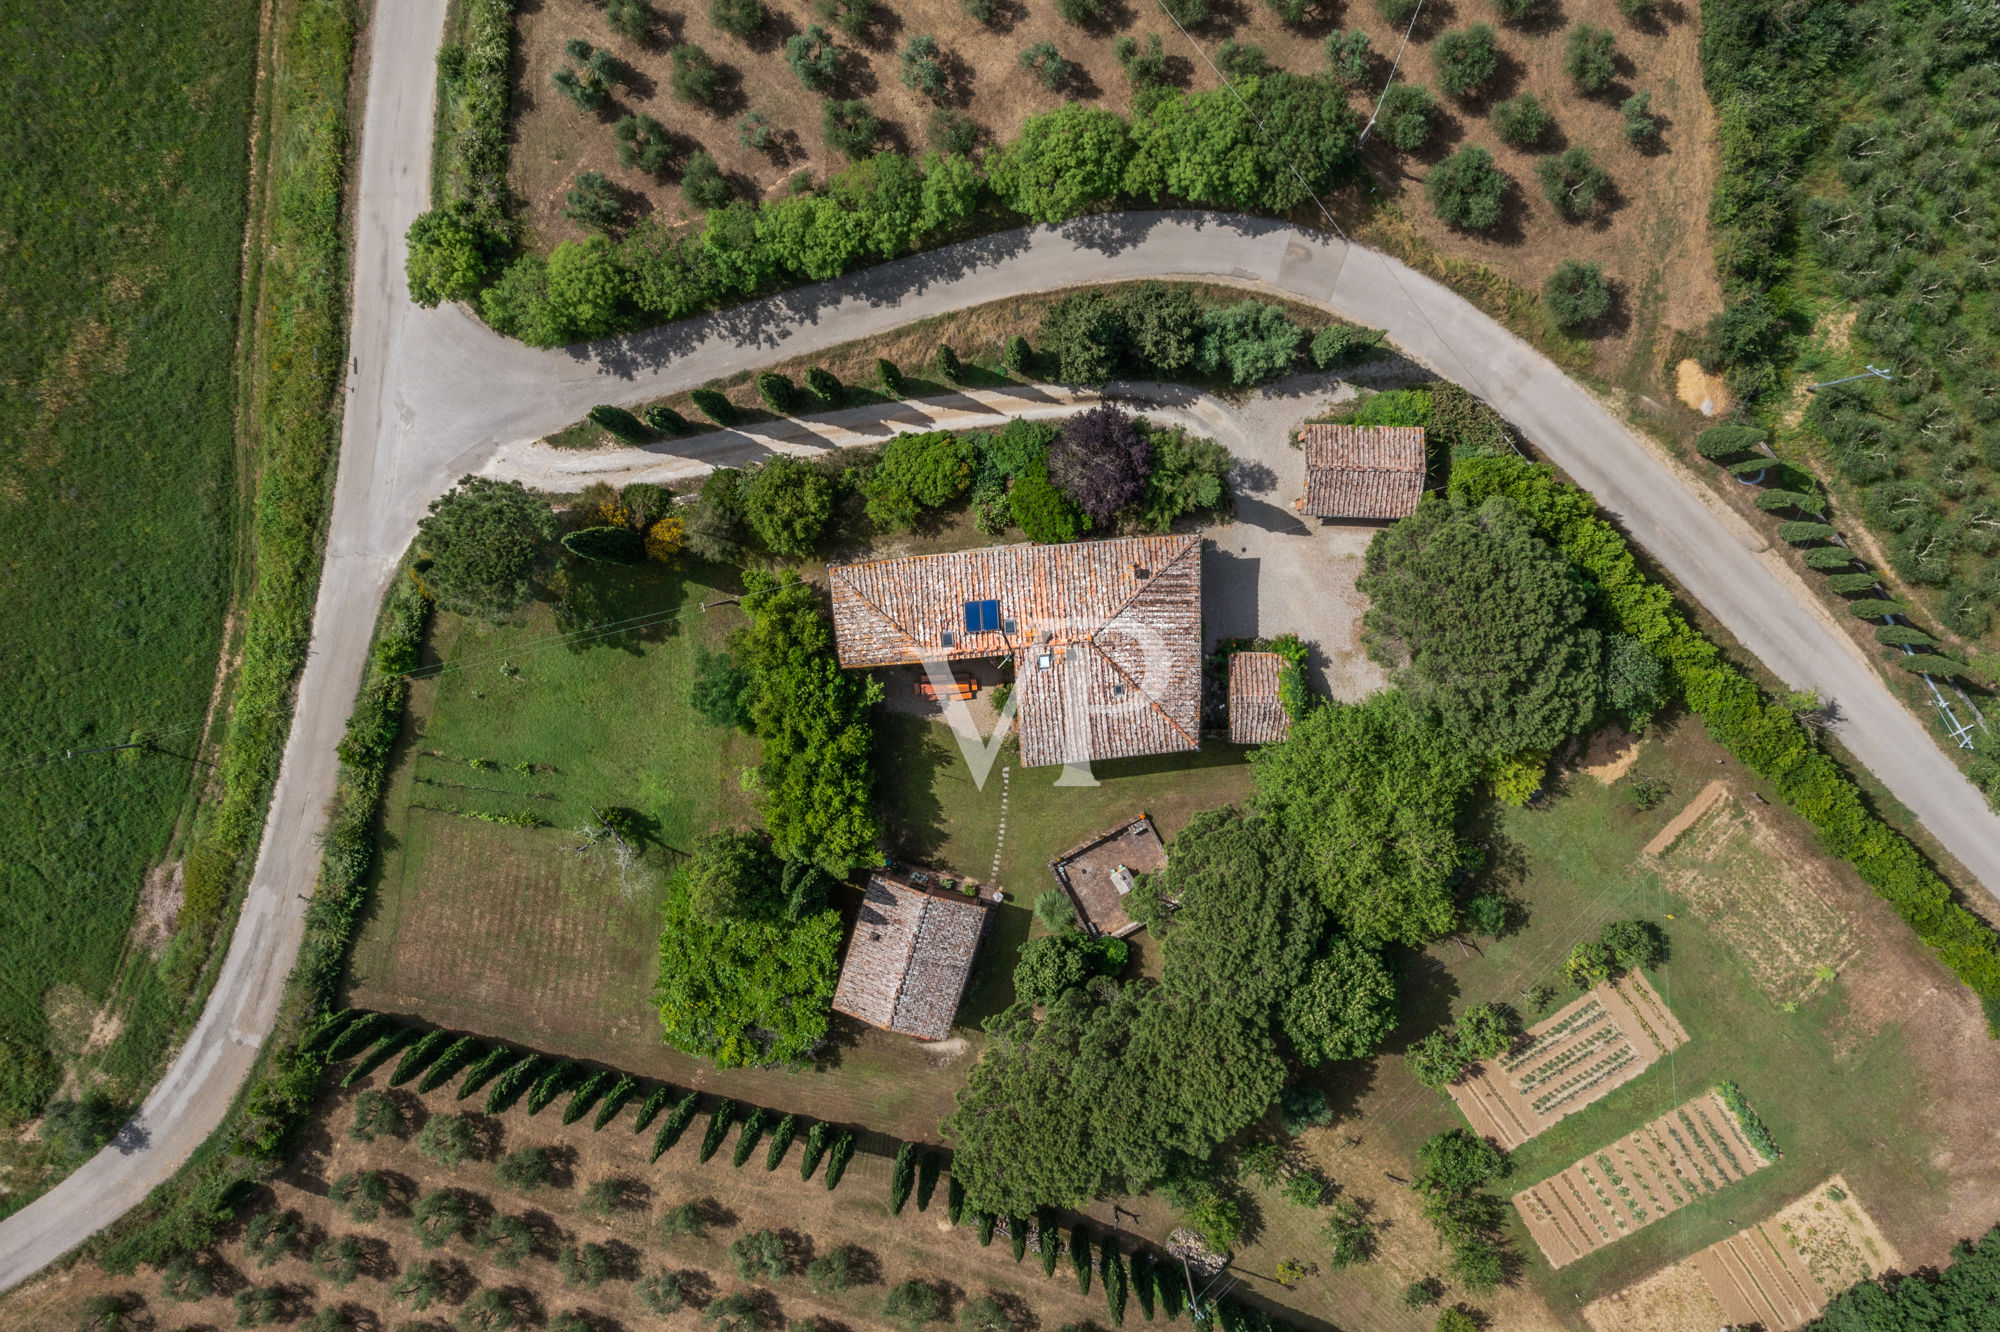 Chianti, Tuscany: magnificent historic estate with independent villa and two outbuildings surrounded by greenery